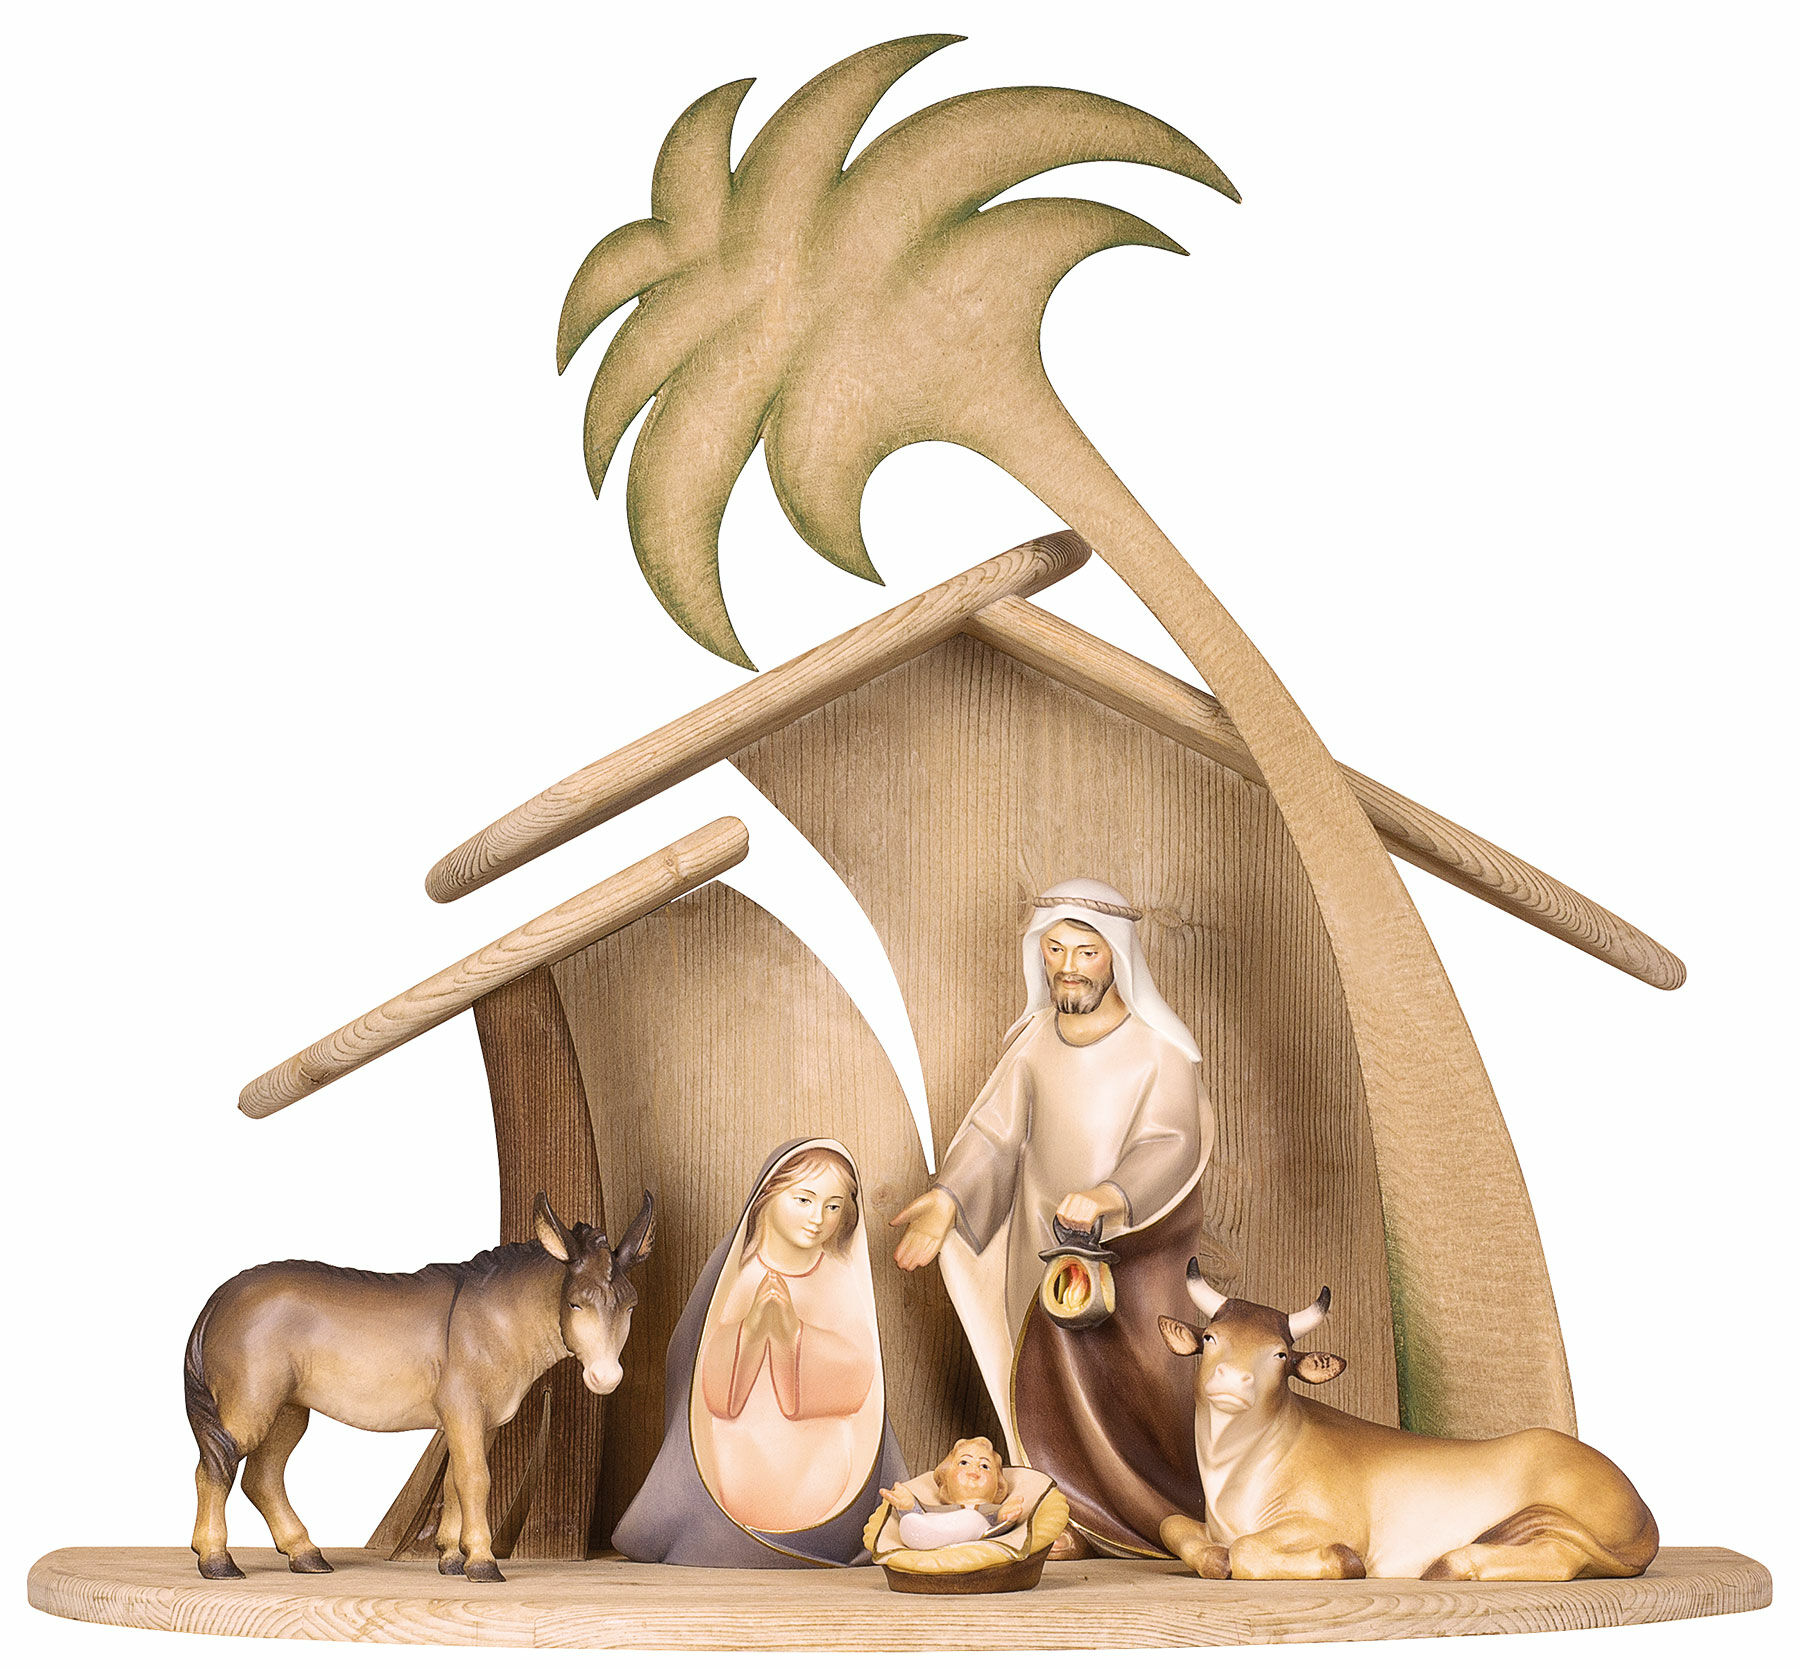 Woodcarving / nativity scene "Comet", 7 pieces